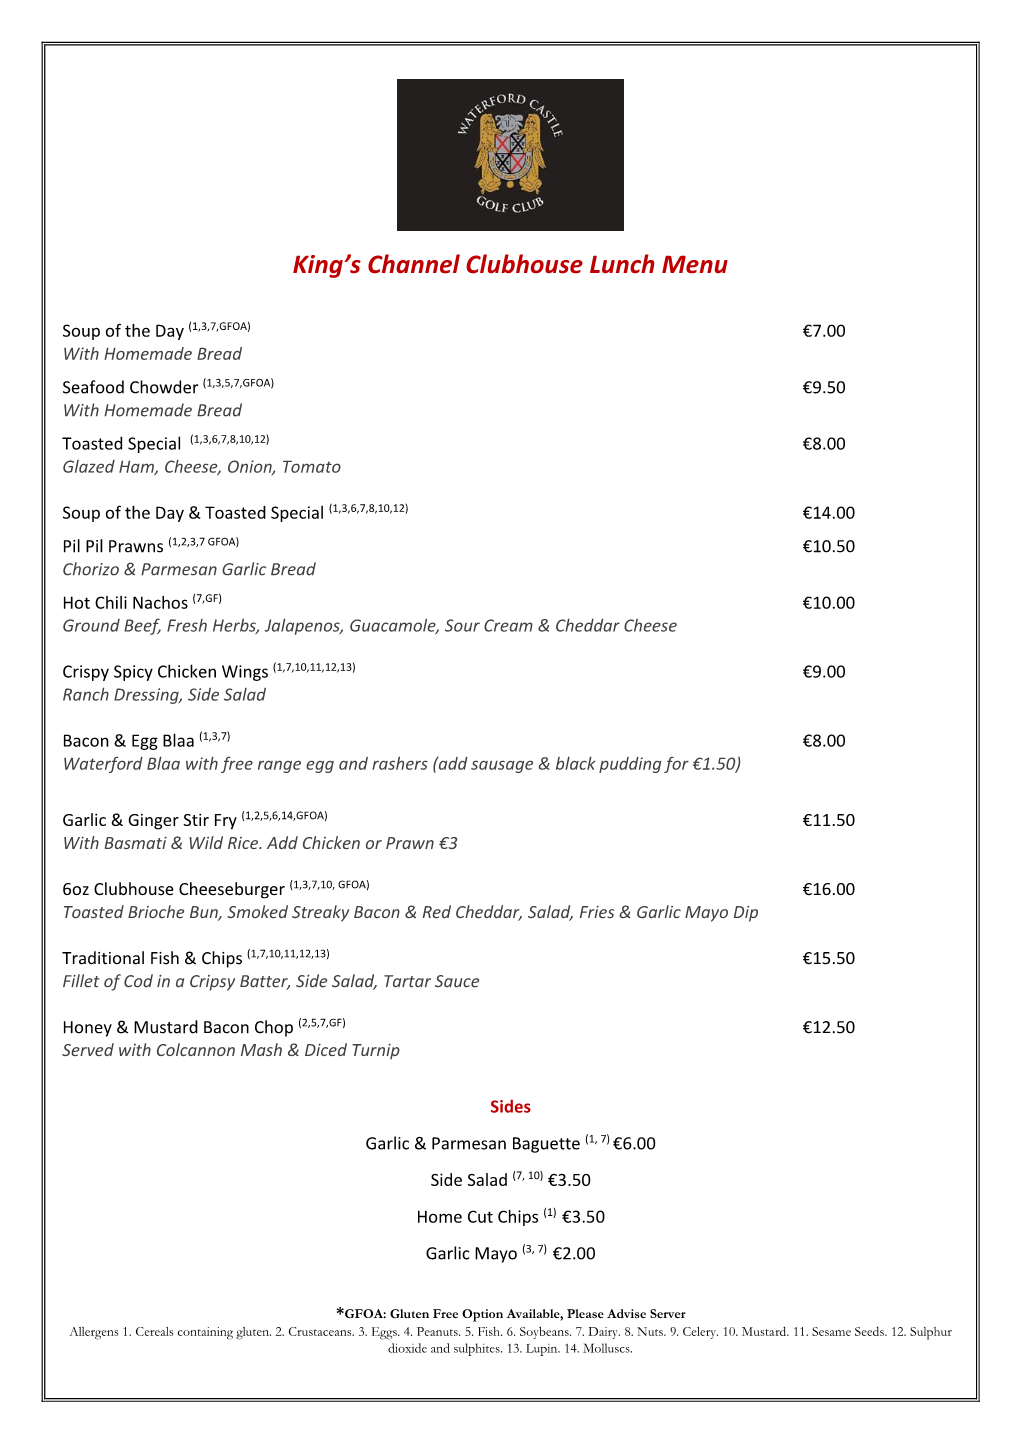 King's Channel Clubhouse Lunch Menu